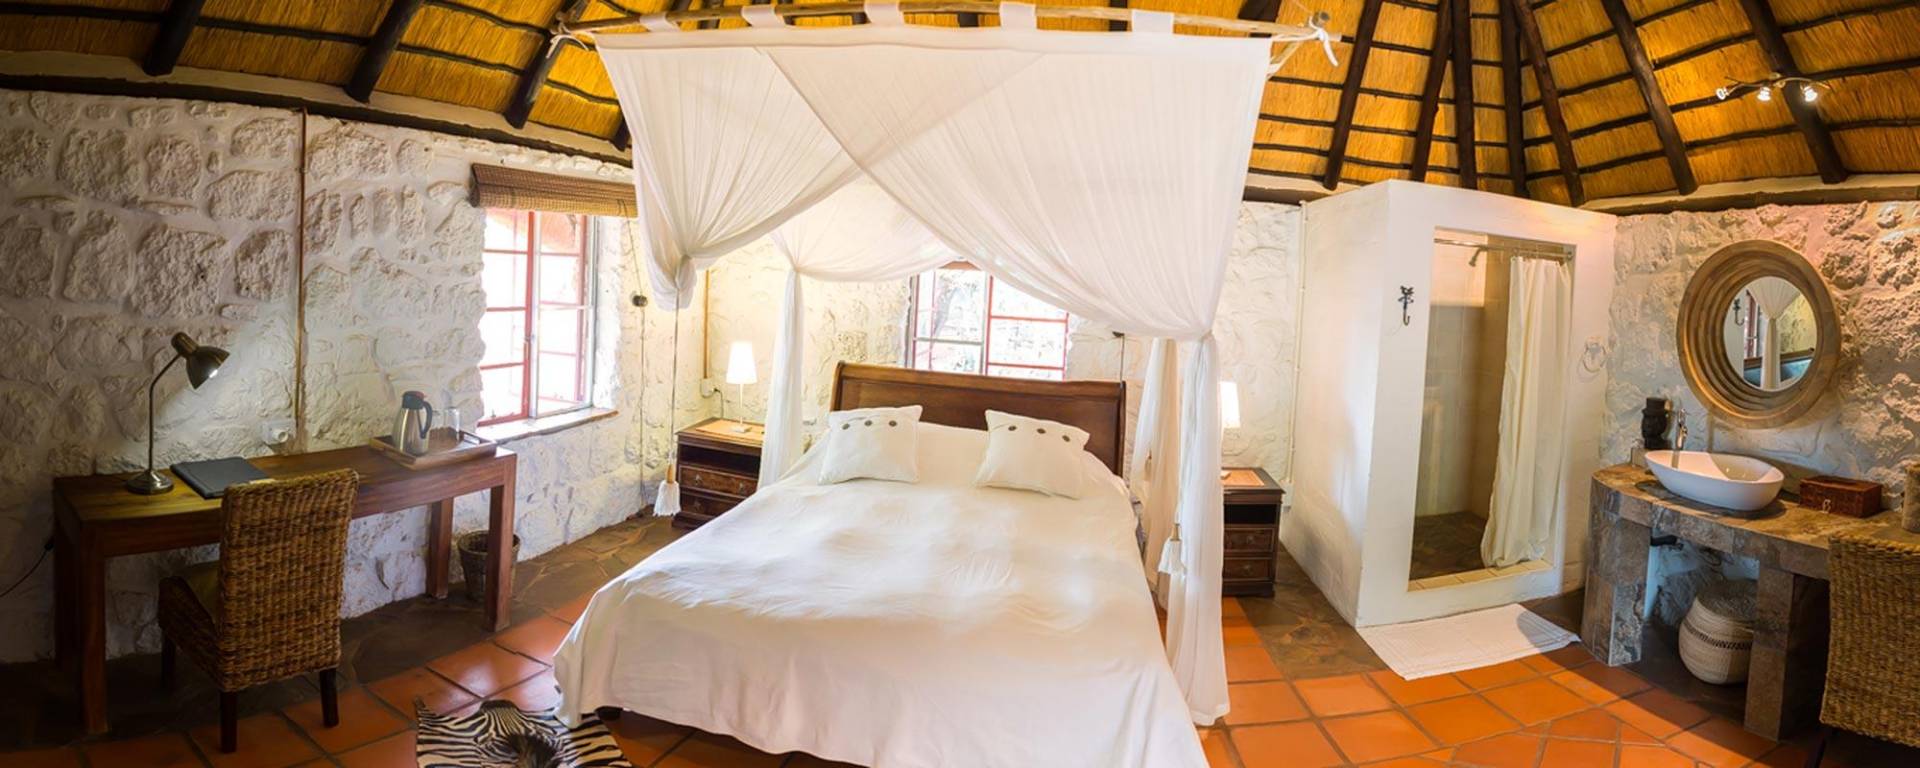 Cozy accommodation in Namibia